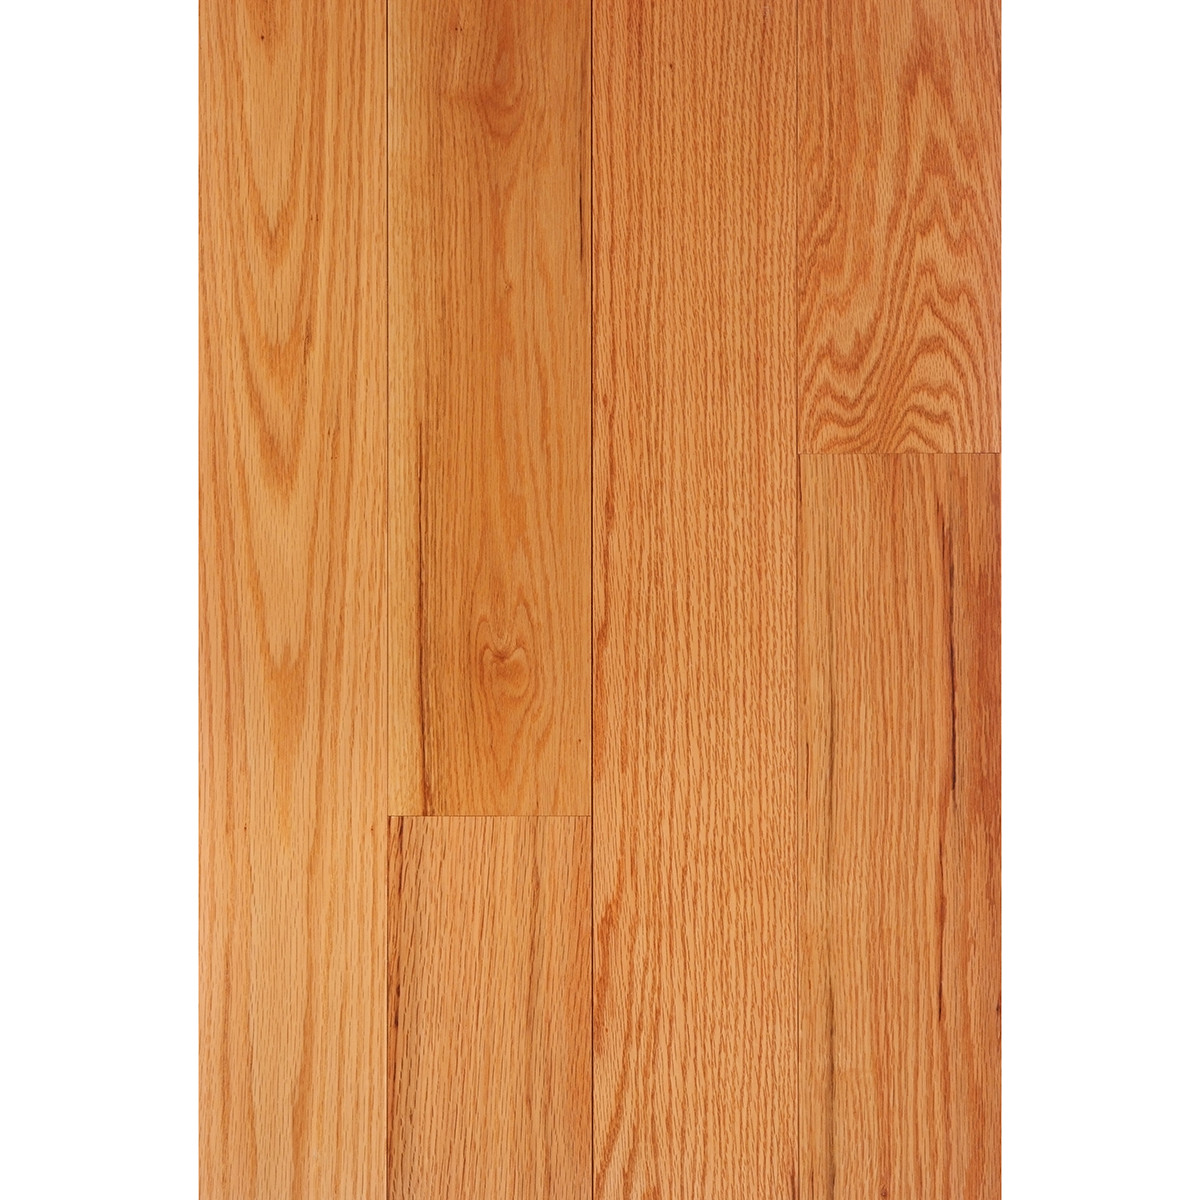 cheap red oak hardwood flooring of red oak 3 4 x 5 select grade flooring inside other items in this category